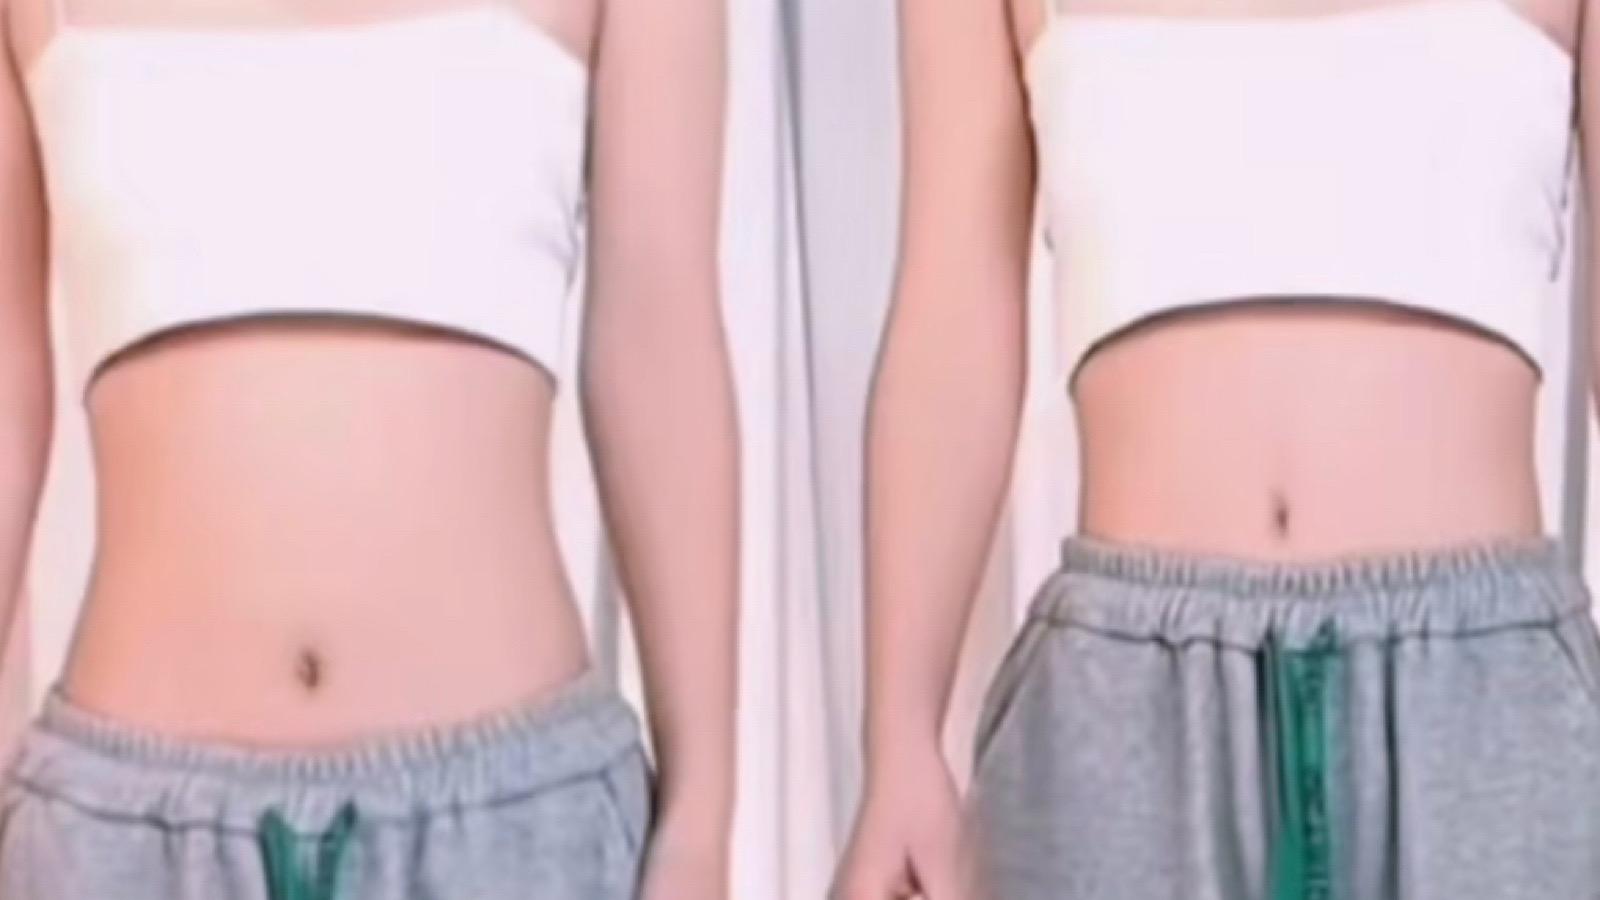 Fake belly buttons sold as quick fix for women who want legs to